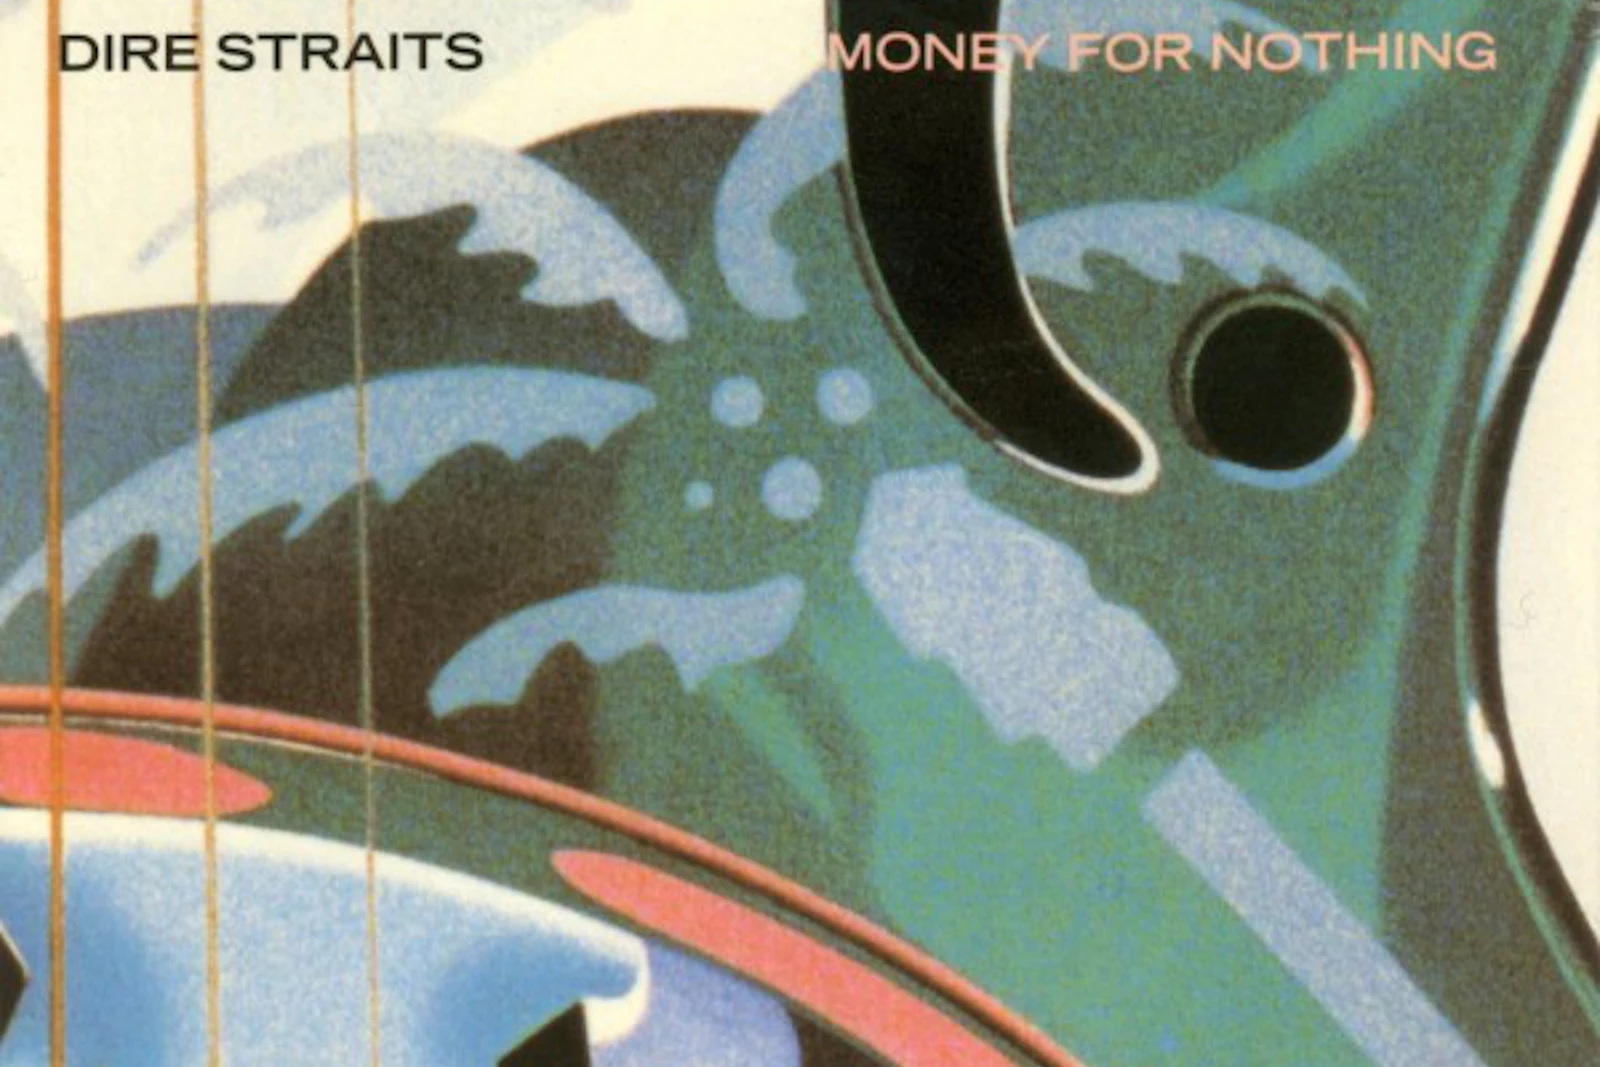 Top MTV Inspired Dire Straits' for Nothing'